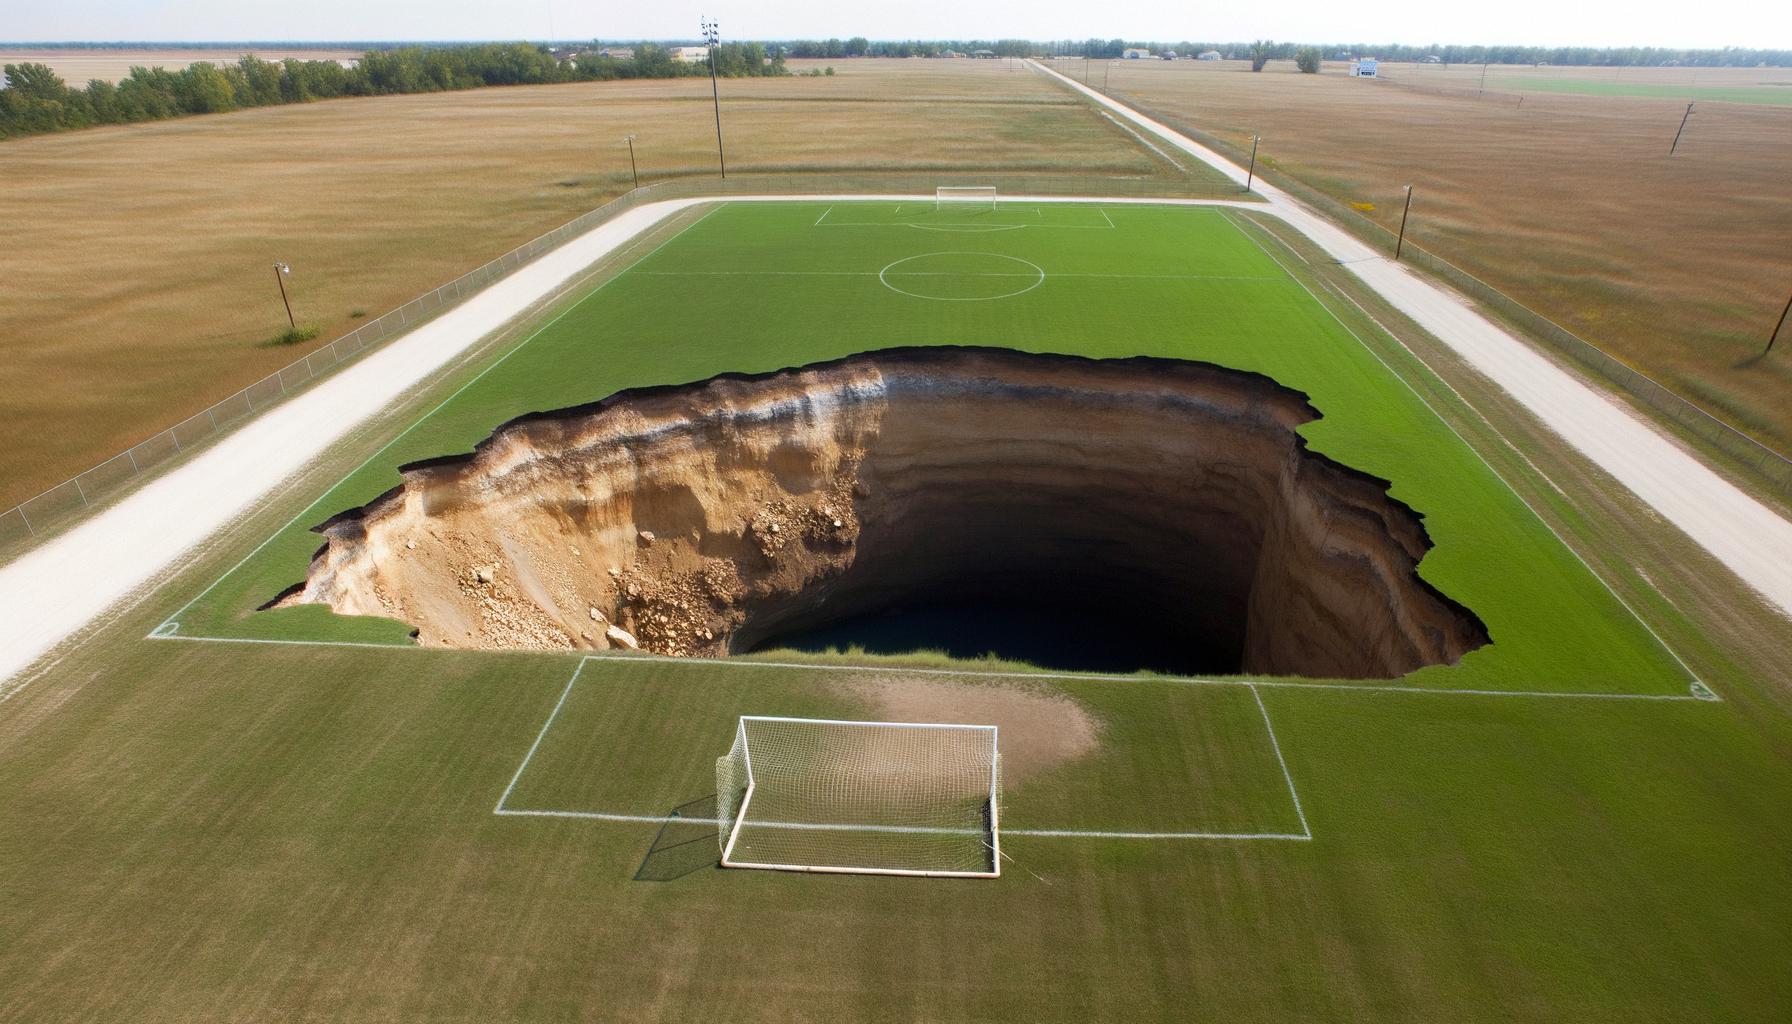 Sinkhole in Illinois due to mine collapse; park temporarily closed.